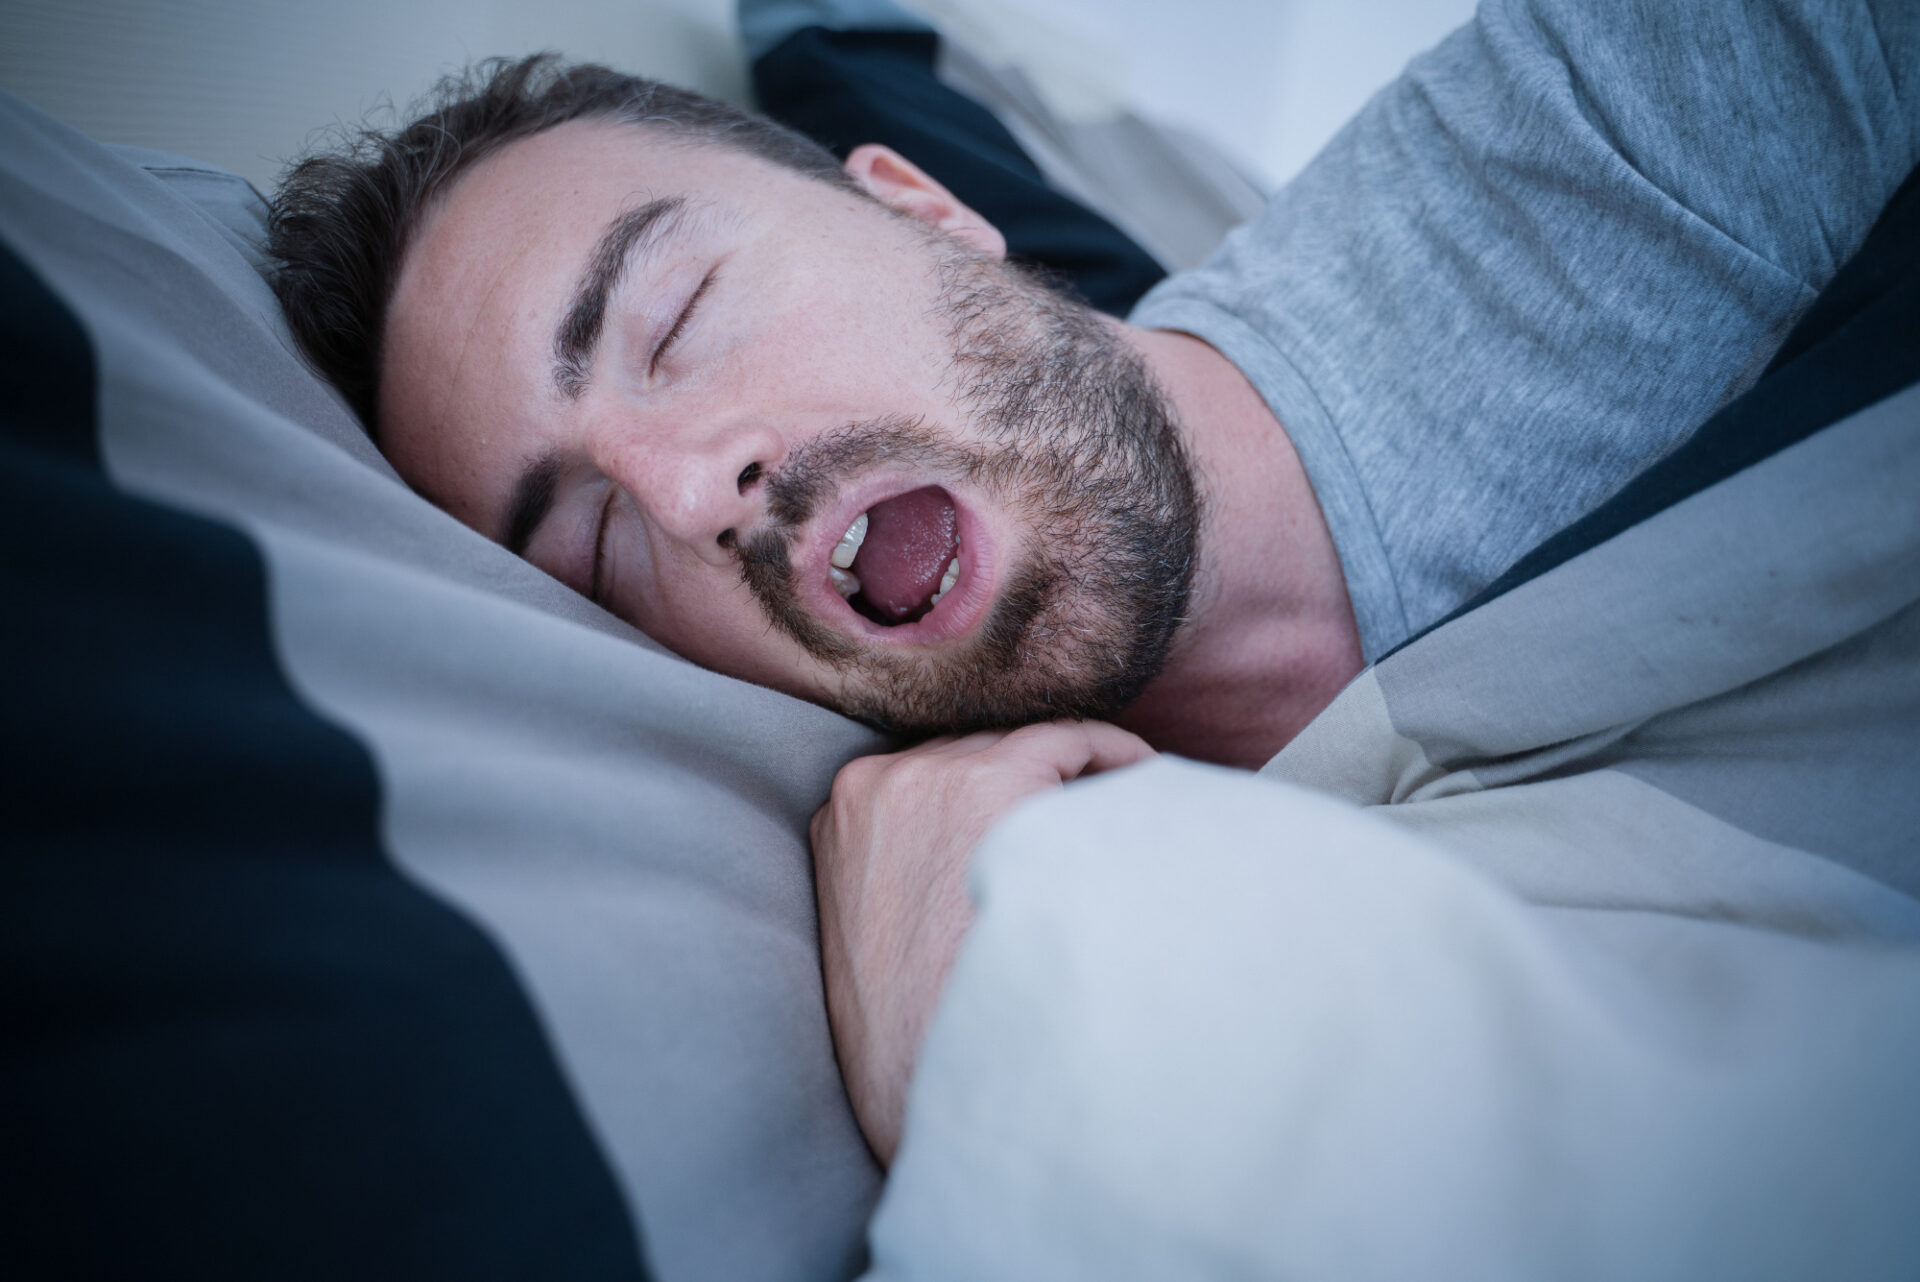 Why Do I Sleep With My Mouth Open?